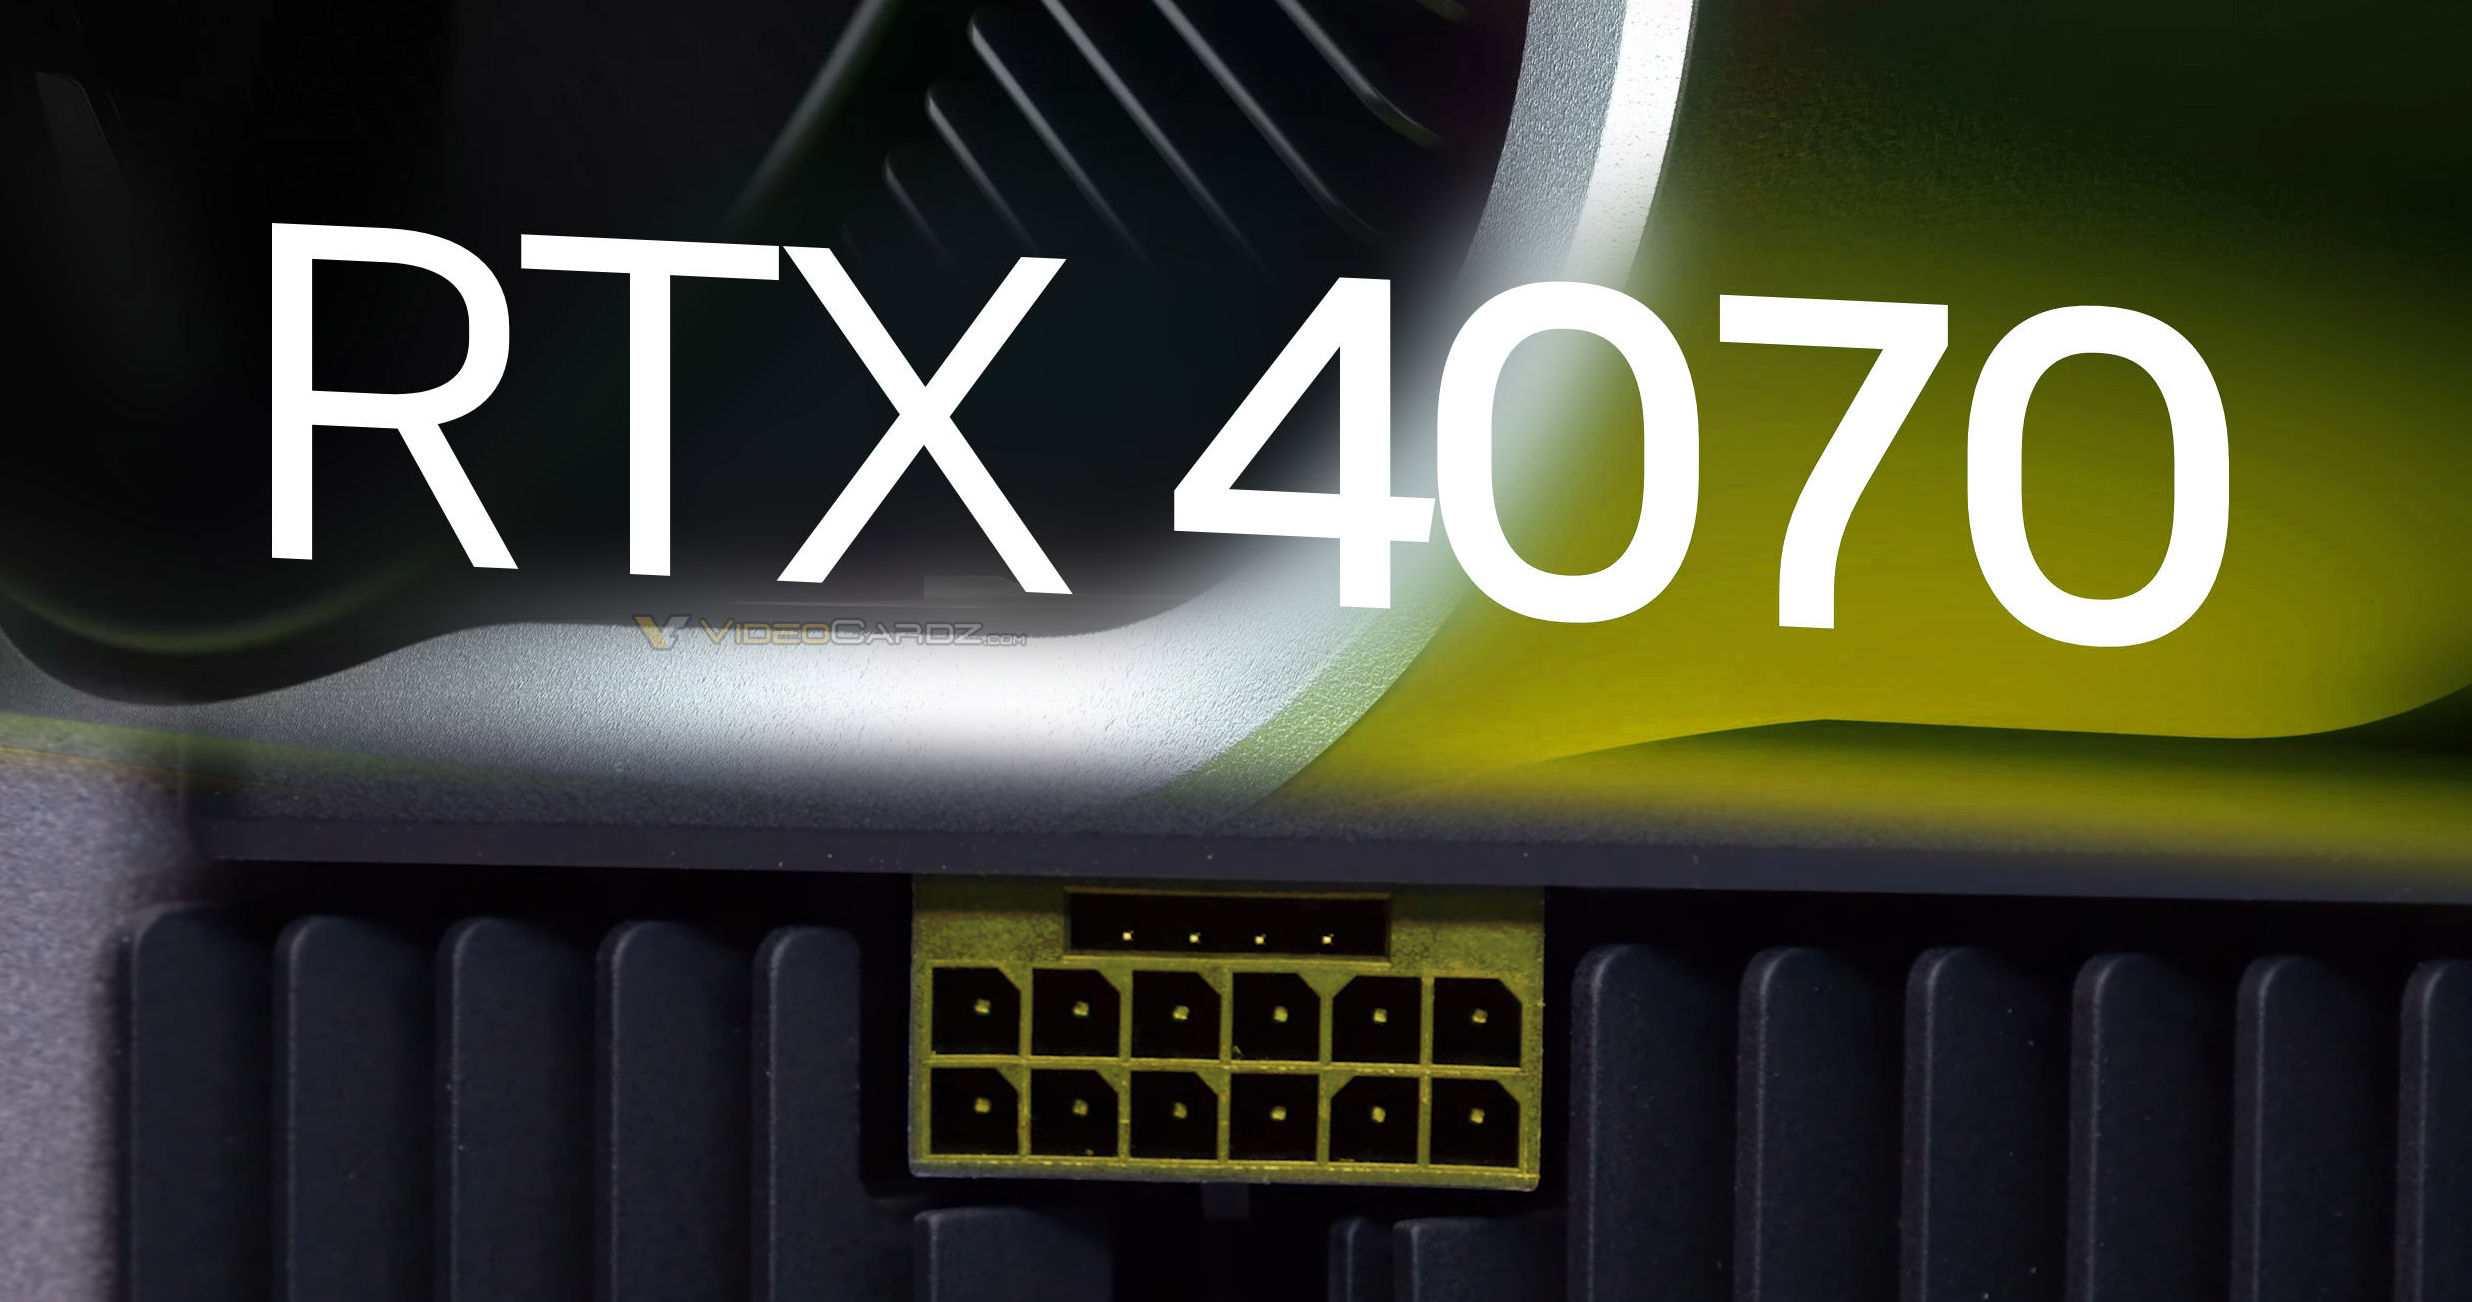 NVIDIA GeForce RTX 4070 GPUs to feature either 16pin or 8pin power